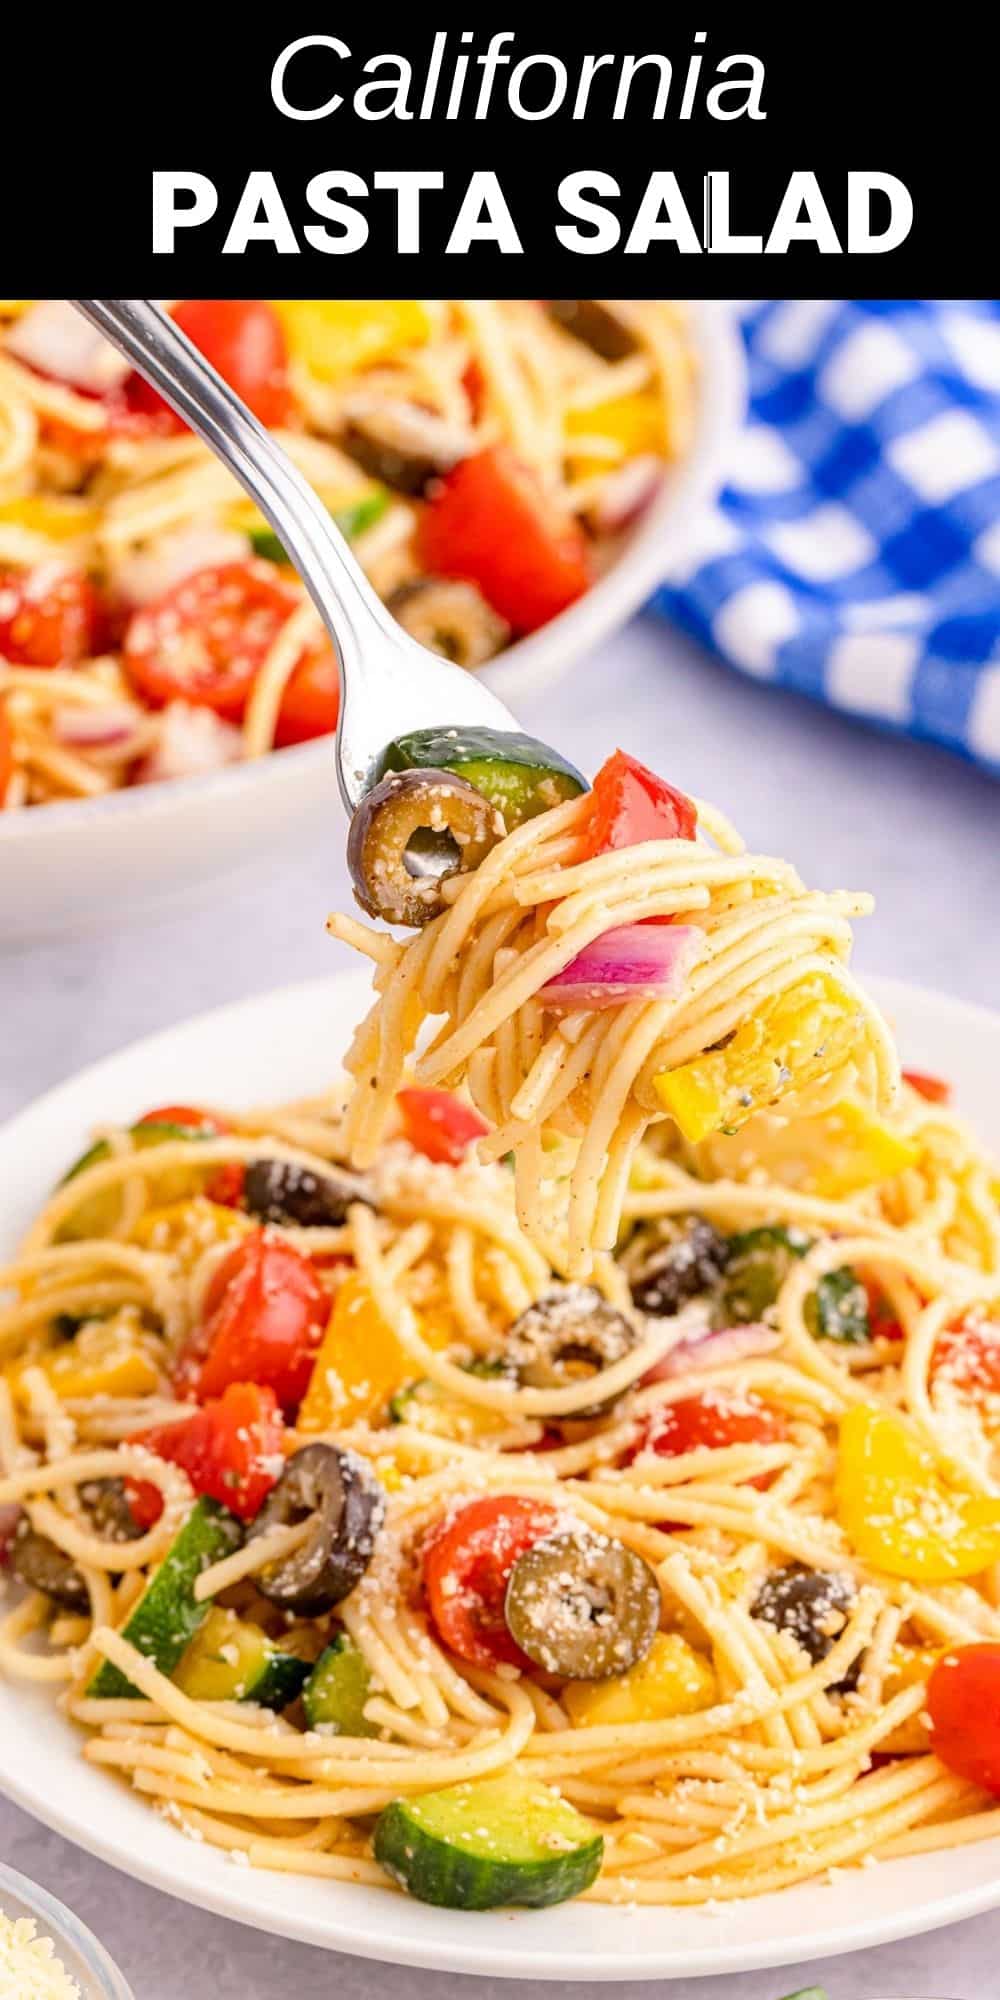 This California spaghetti salad recipe is a delicious and versatile treat that the whole family will love. Packed with tons of flavor, this delicious dish will be your new favorite quick meal for summer!